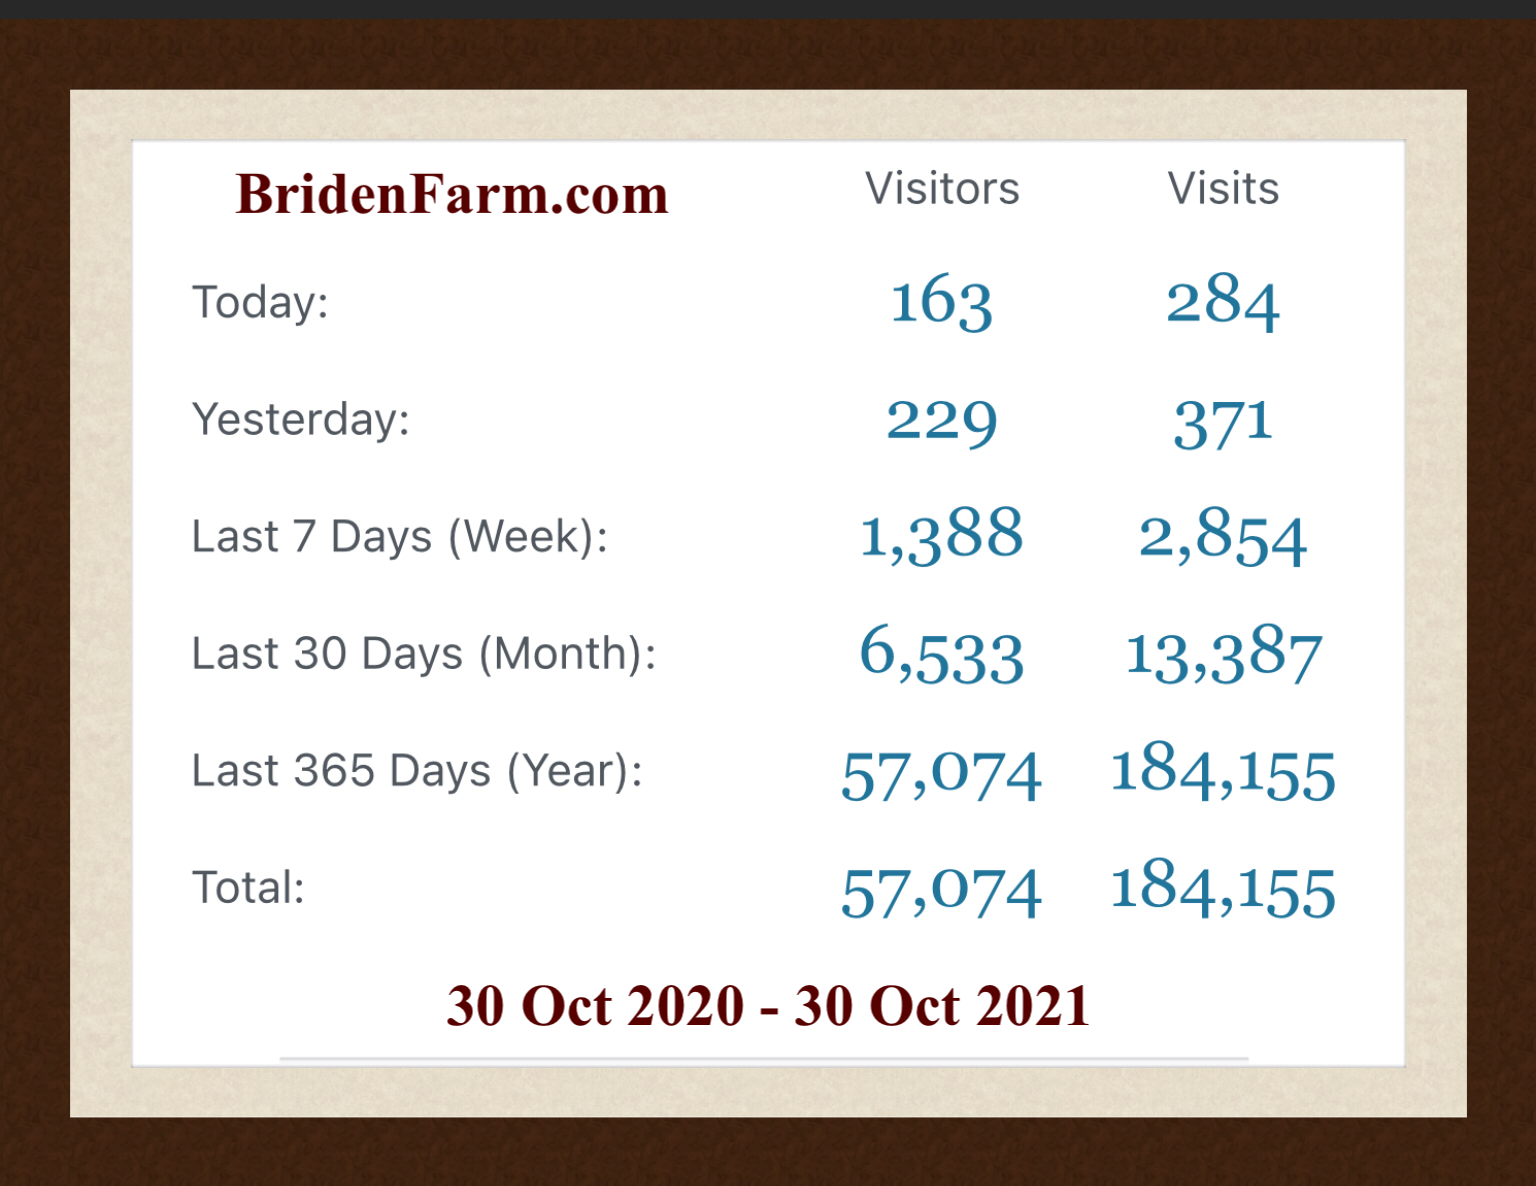 Over 57,000 Visits in Our first Year